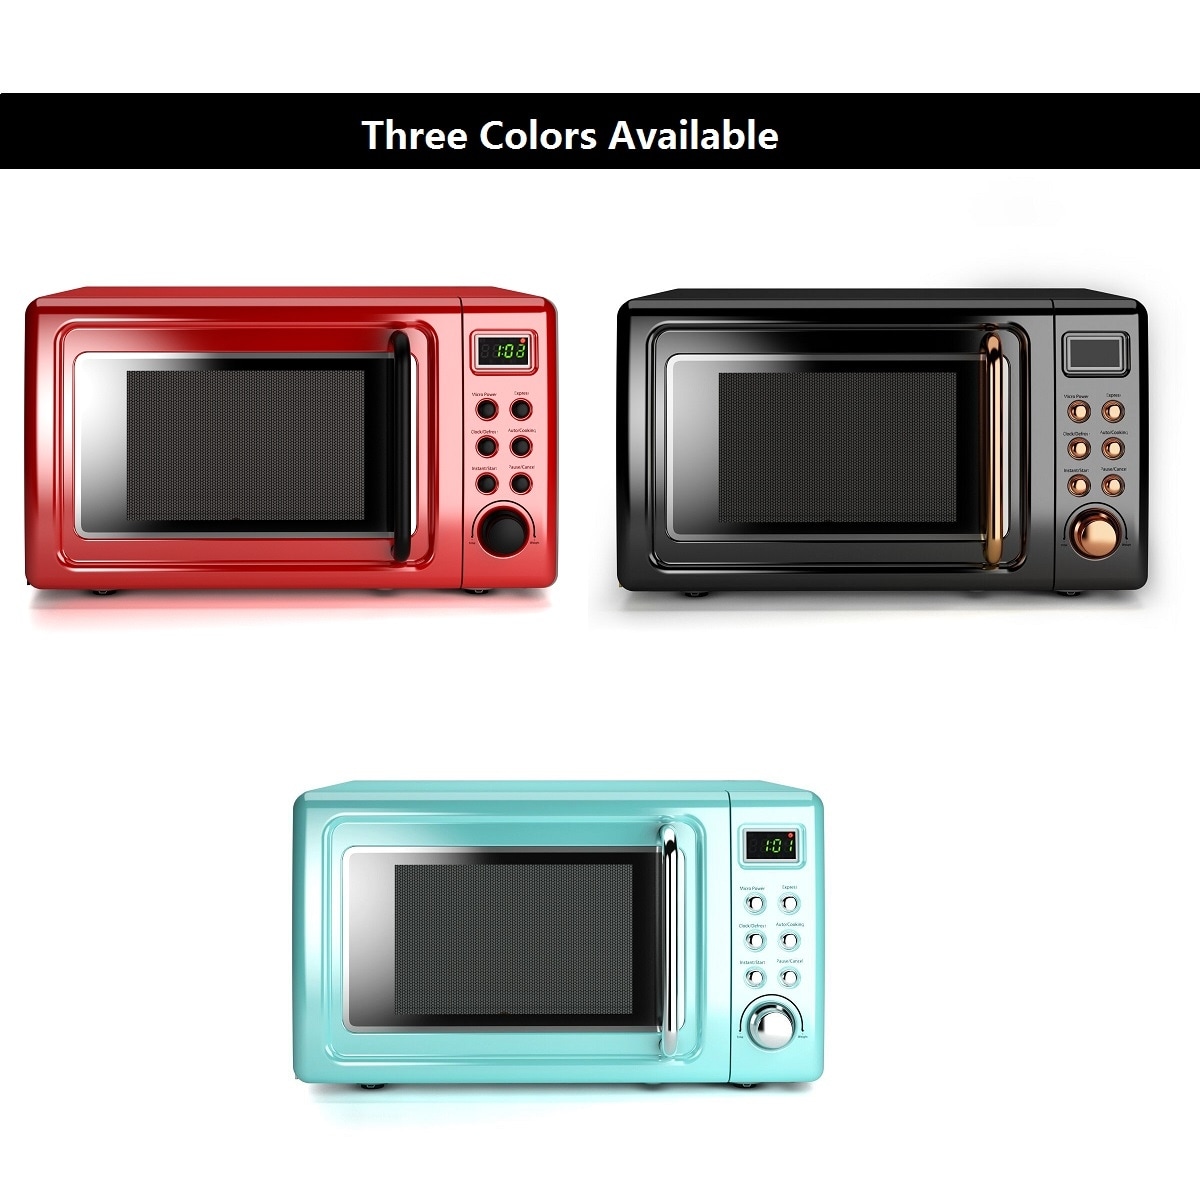 https://ak1.ostkcdn.com/images/products/is/images/direct/a6df292af6b0d7746d1c835f5ae0d1da22925c3a/Costway-0.7Cu.ft-Retro-Countertop-Microwave-Oven-700W-LED-Display-Glass-Turntable-RedGreenblack-rose-gold.jpg